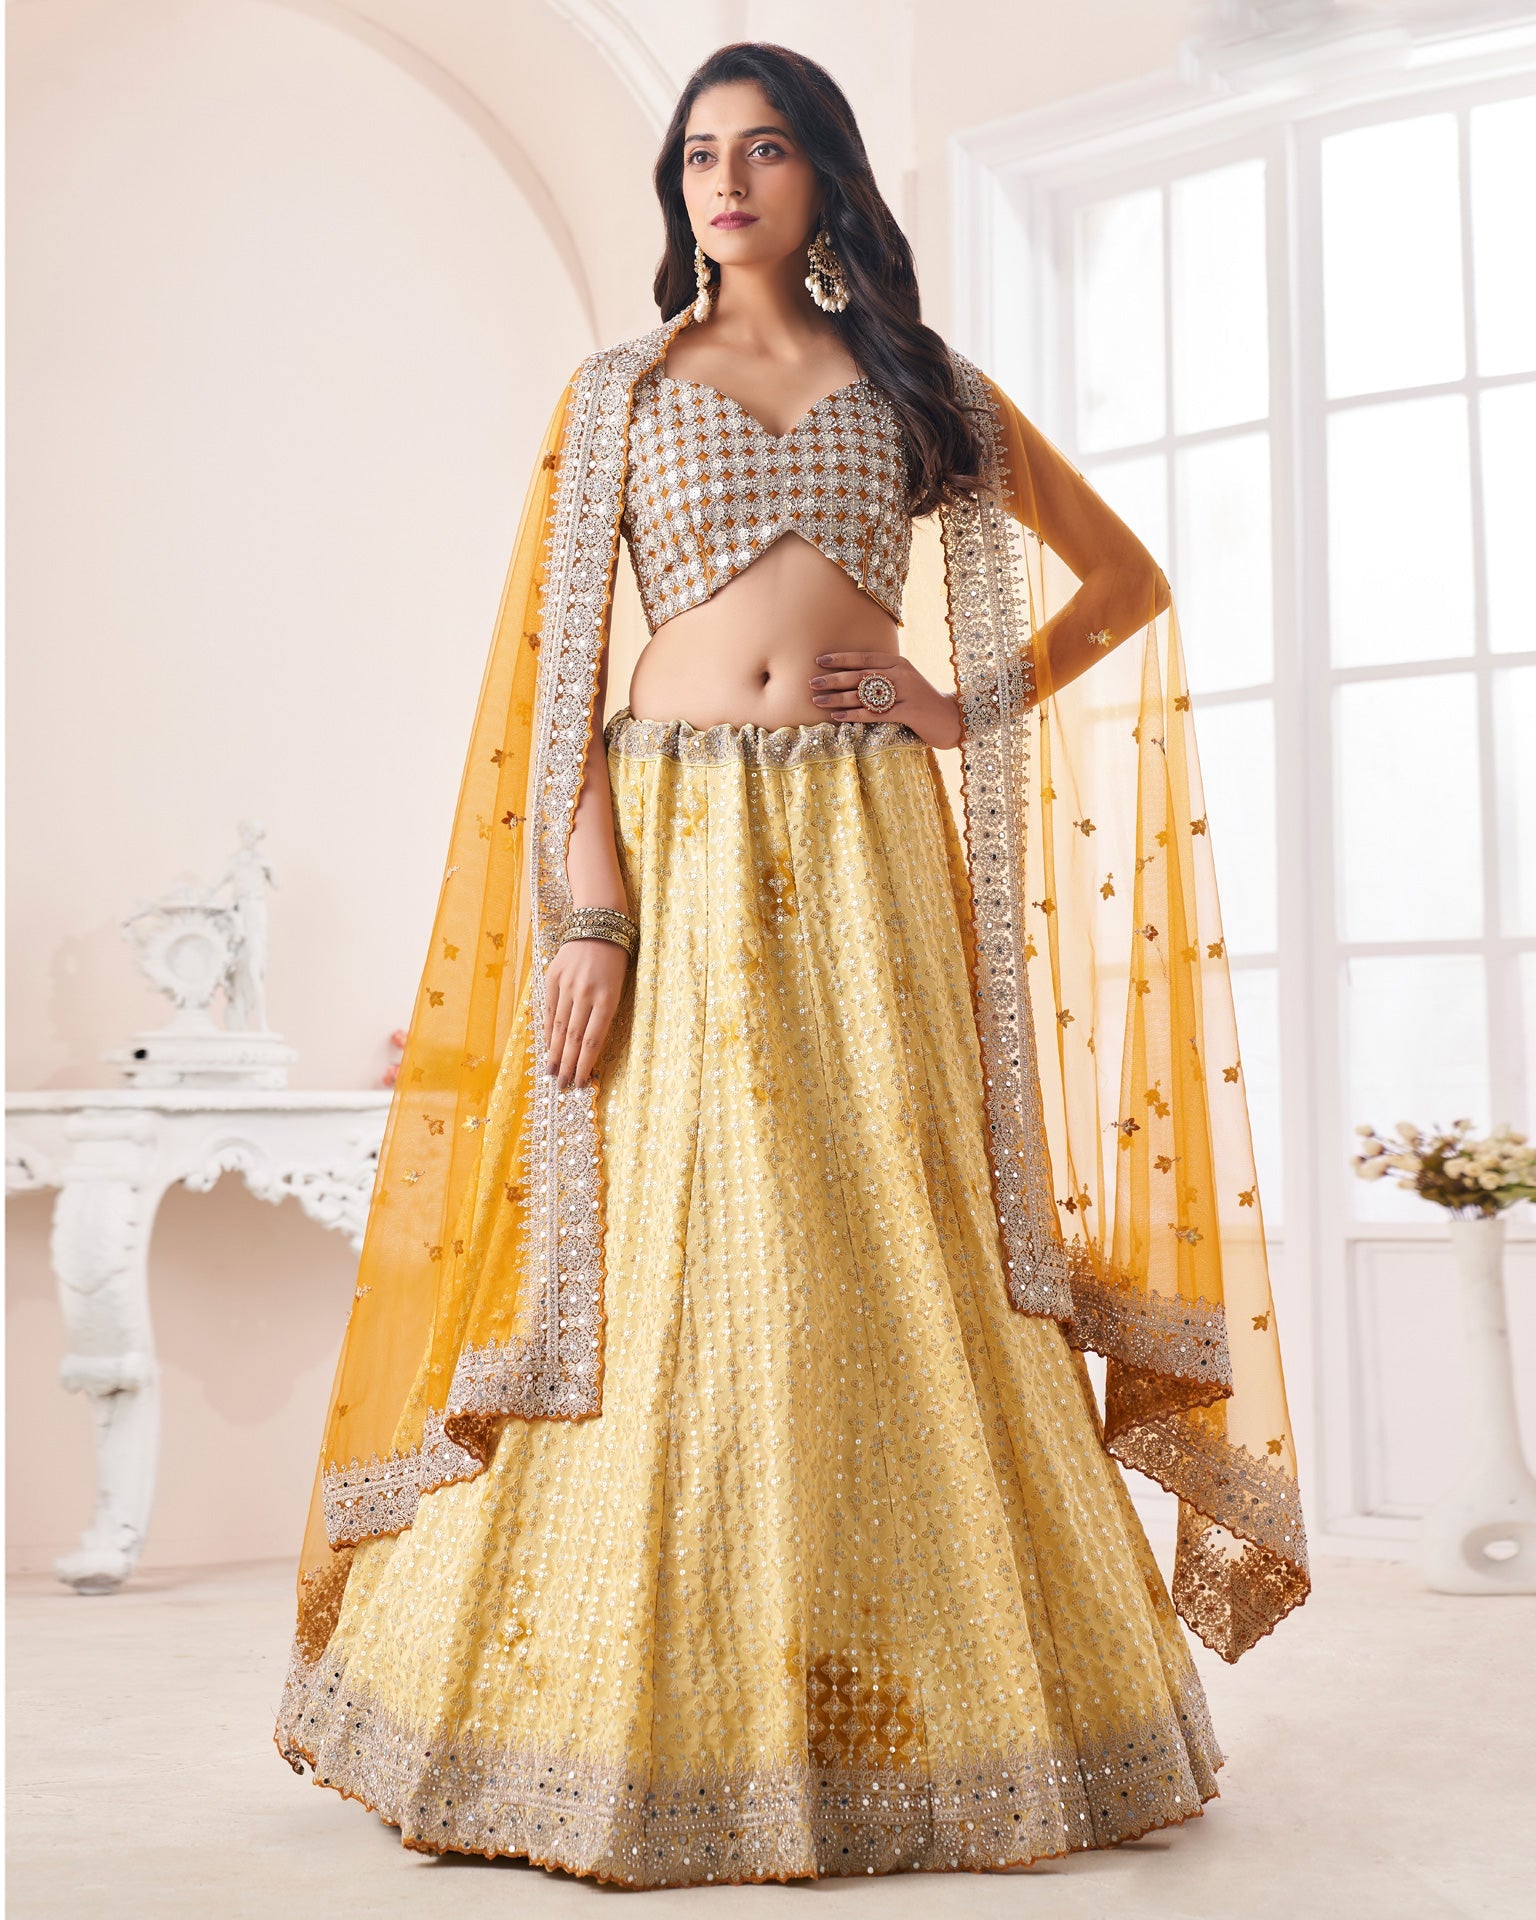 Buy BITE KITE Women's Embroidery And Mirror Work Unstitched Lehenga Choli  Suitable For Haldi And Sangeet Function (Lemon Yellow & White) at Amazon.in